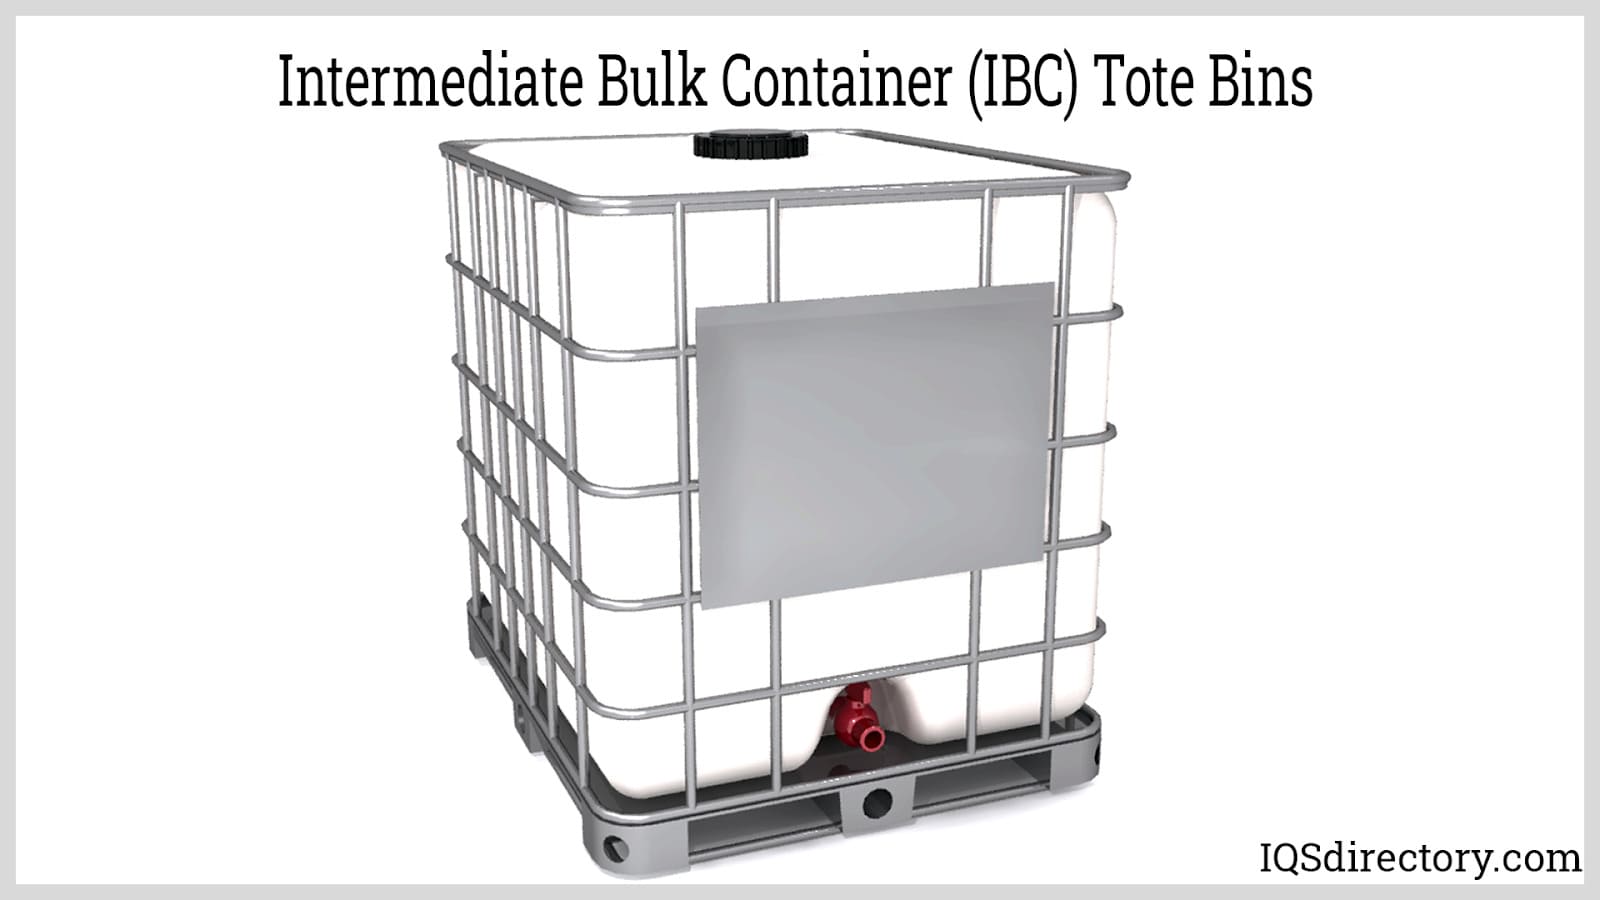 https://www.iqsdirectory.com/articles/plastic-container/ibc-tote-bins.jpg